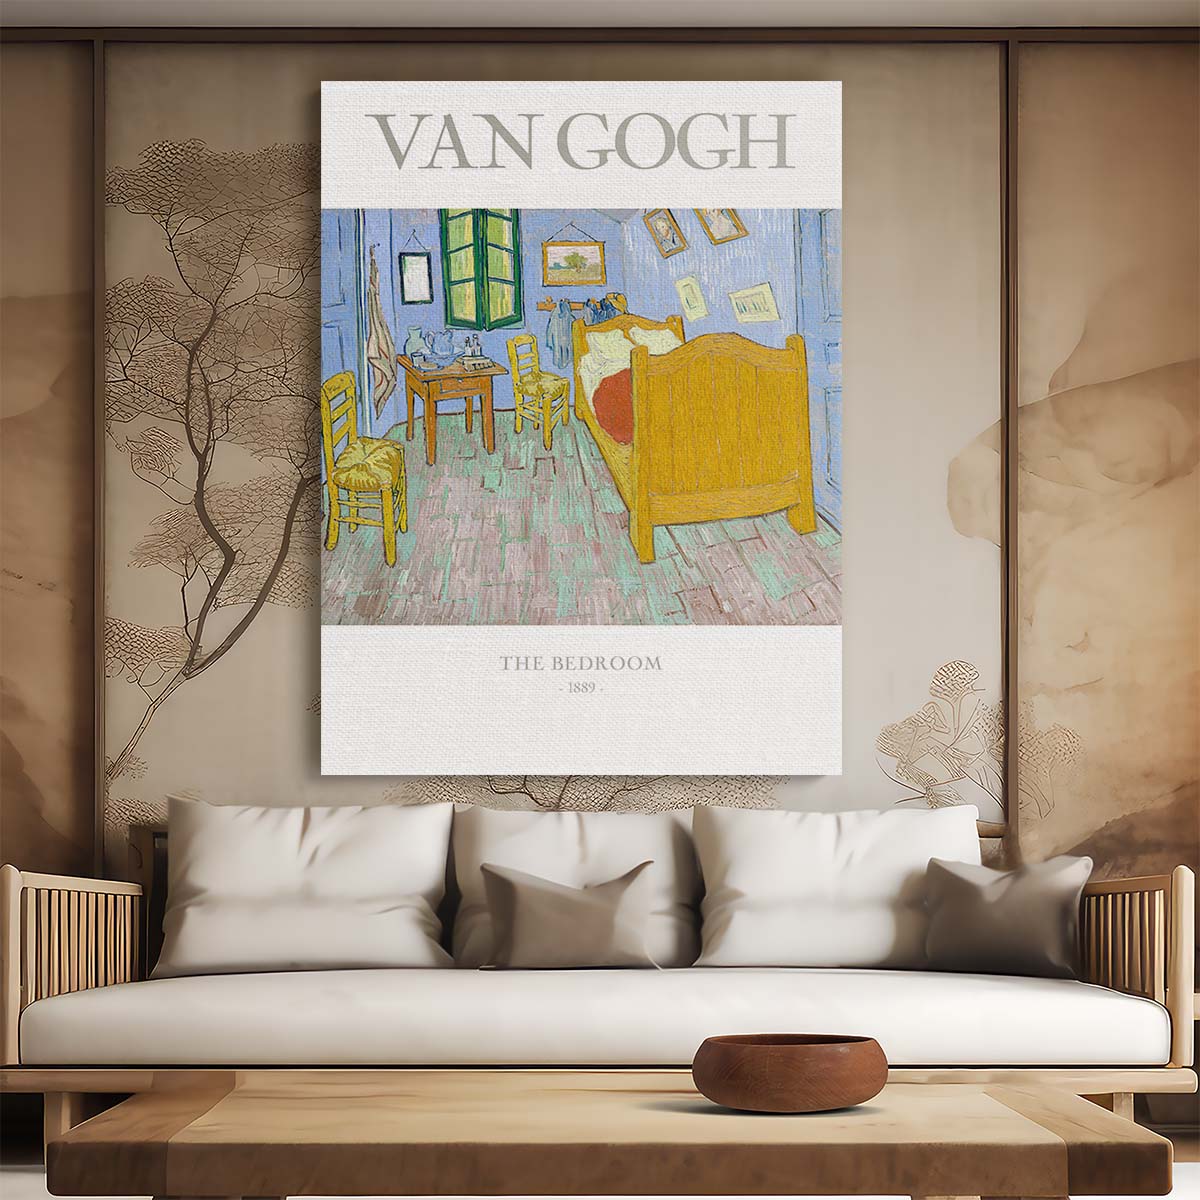 Van Gogh's Master Oil Painting 'The Bedroom' 1889 - Acrylic Blue Wall Art by Luxuriance Designs, made in USA